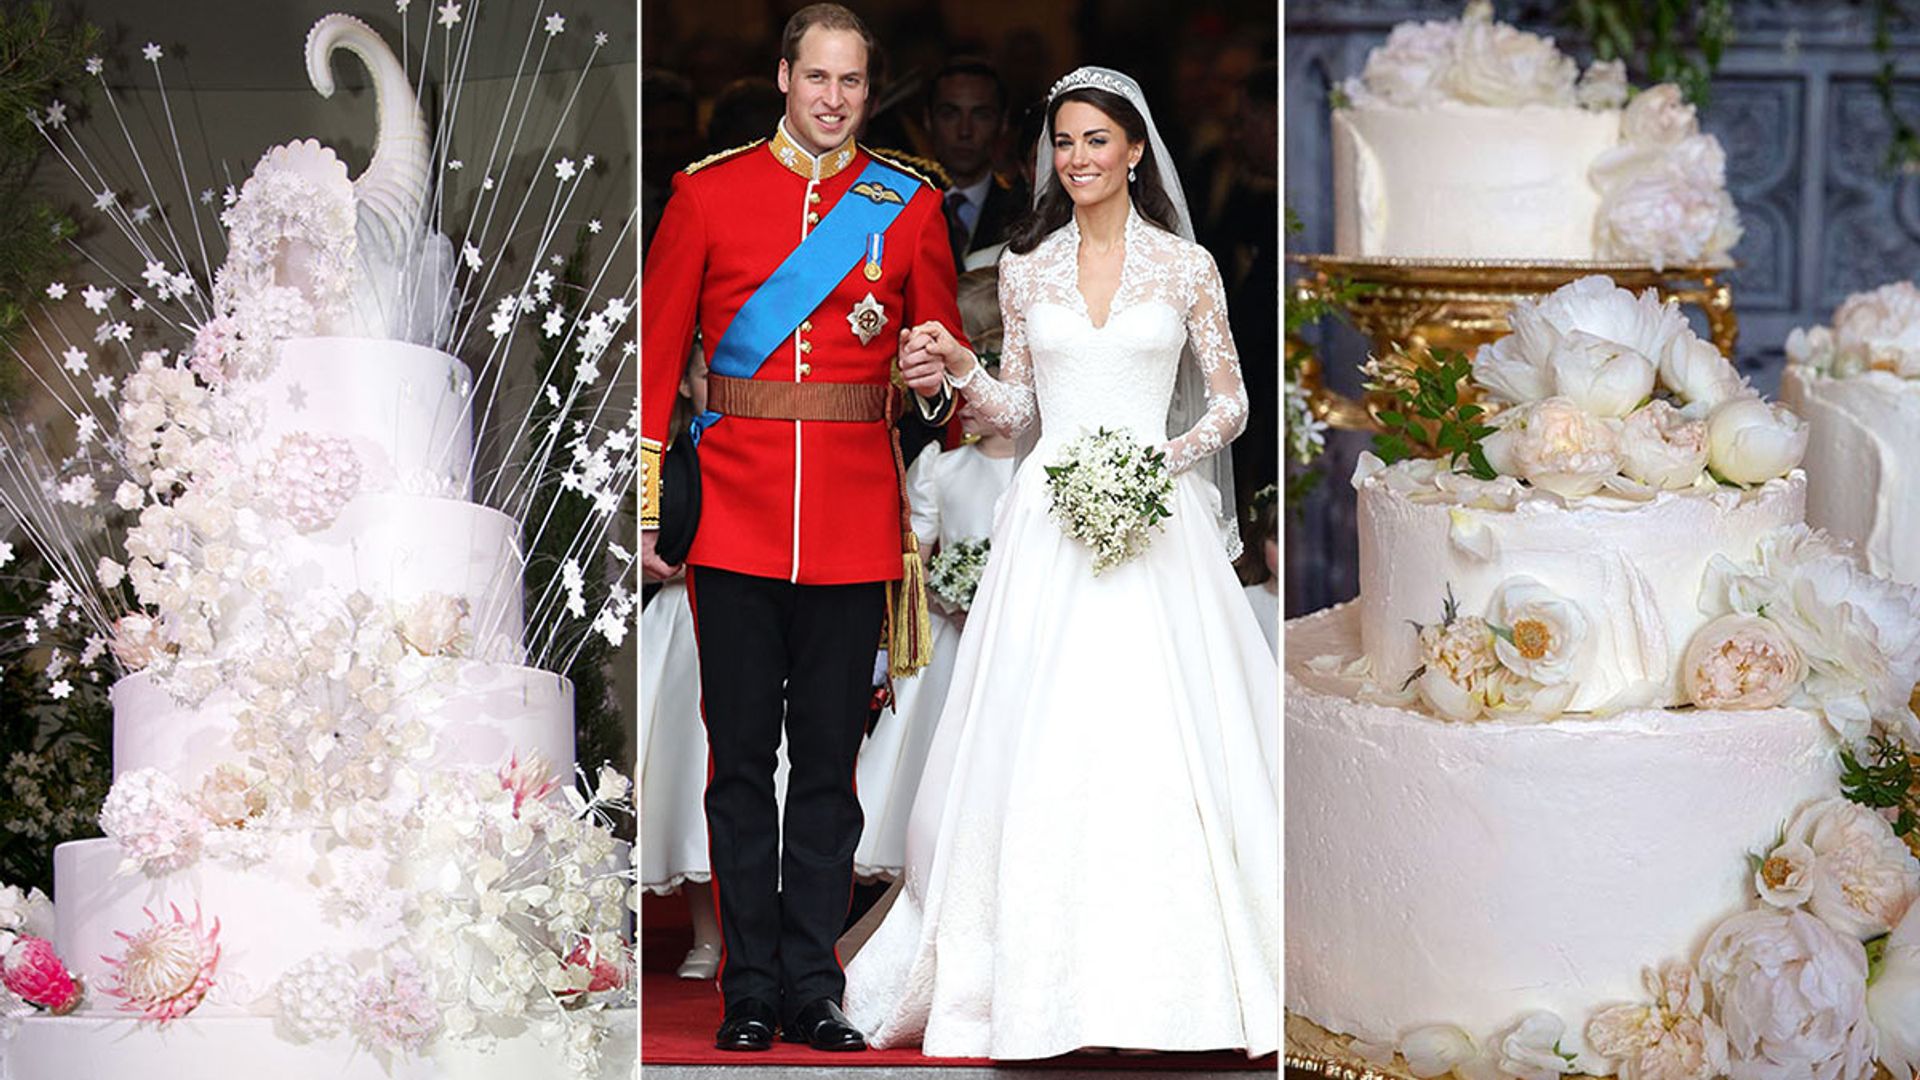 Kate Middleton, the Queen & royals' beautiful royal wedding cakes - see photos